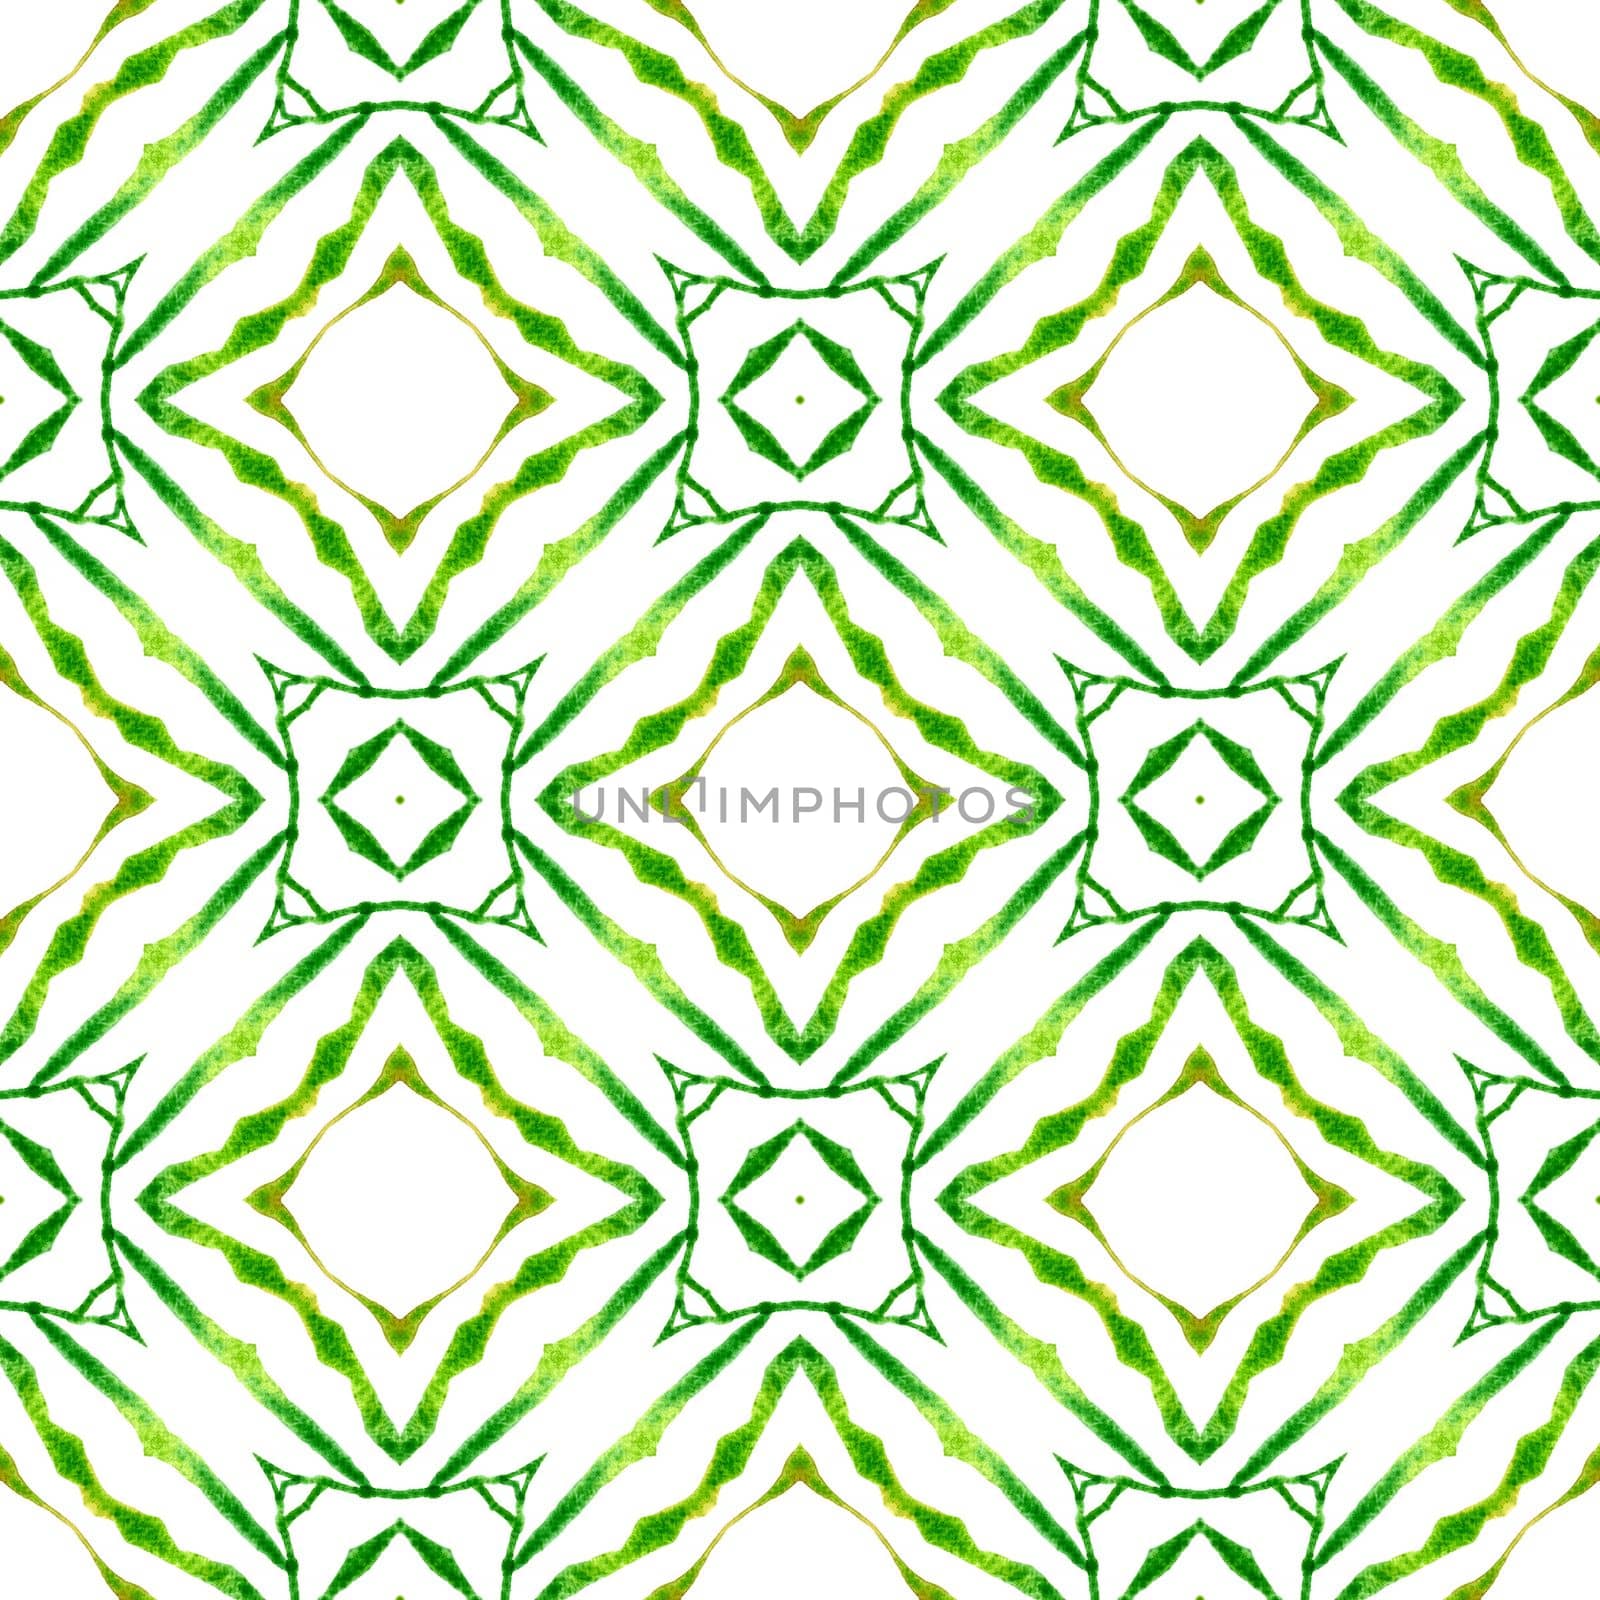 Textile ready majestic print, swimwear fabric, wallpaper, wrapping. Green magnificent boho chic summer design. Watercolor medallion seamless border. Medallion seamless pattern.